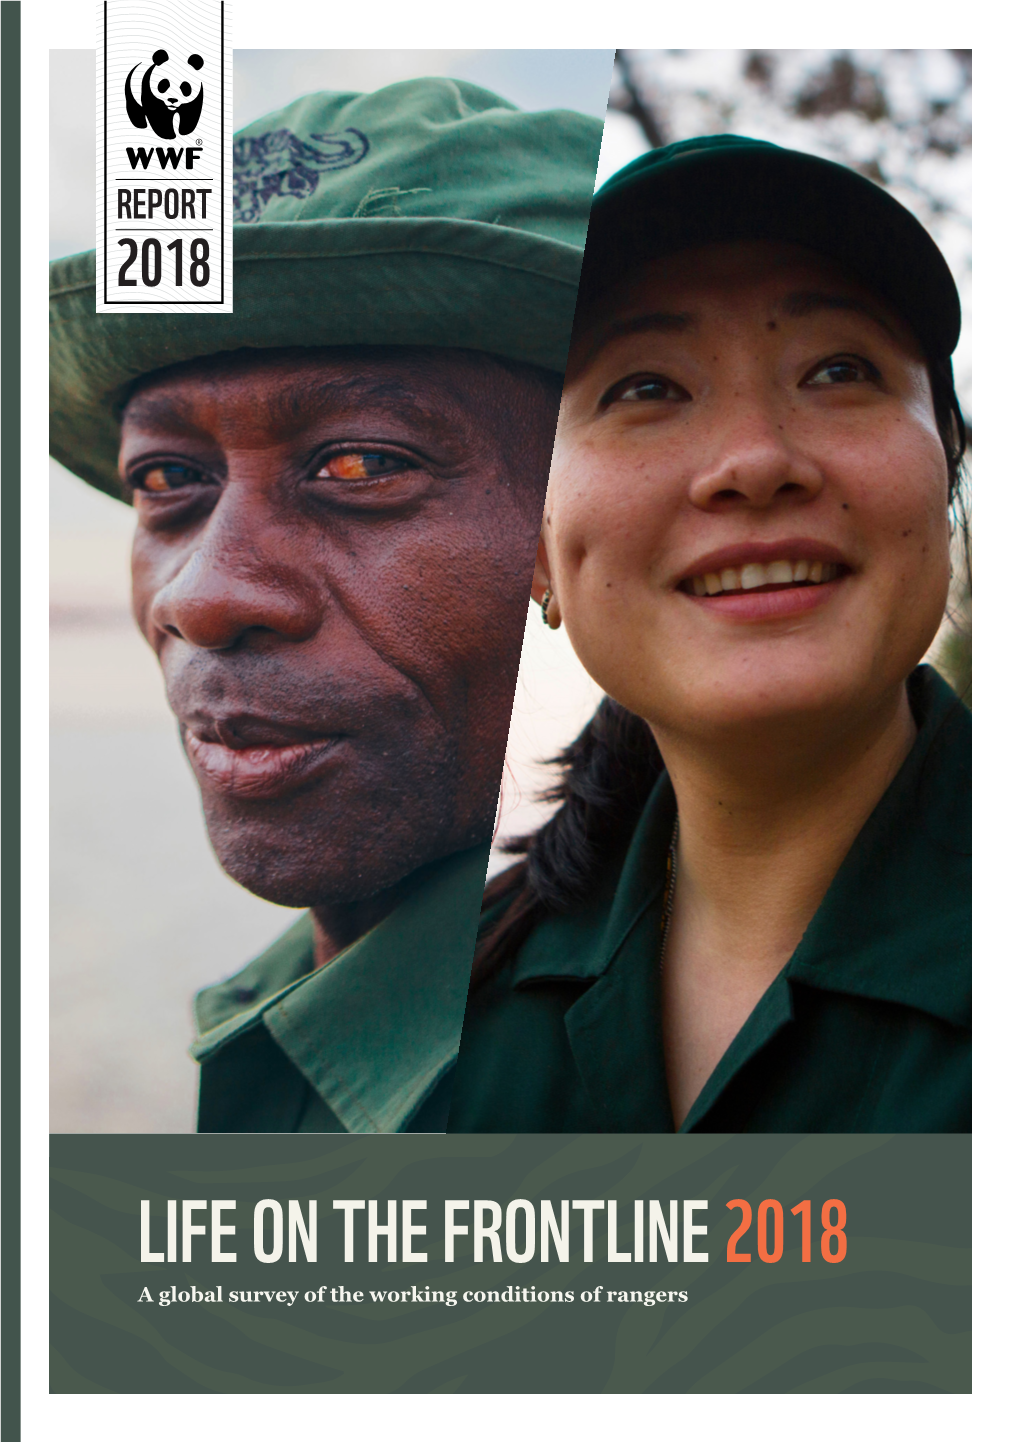 LIFE on the FRONTLINE 2018 a Global Survey of the Working Conditions of Rangers PROJECT TEAM Mike Belecky, Rohit Singh & William Moreto